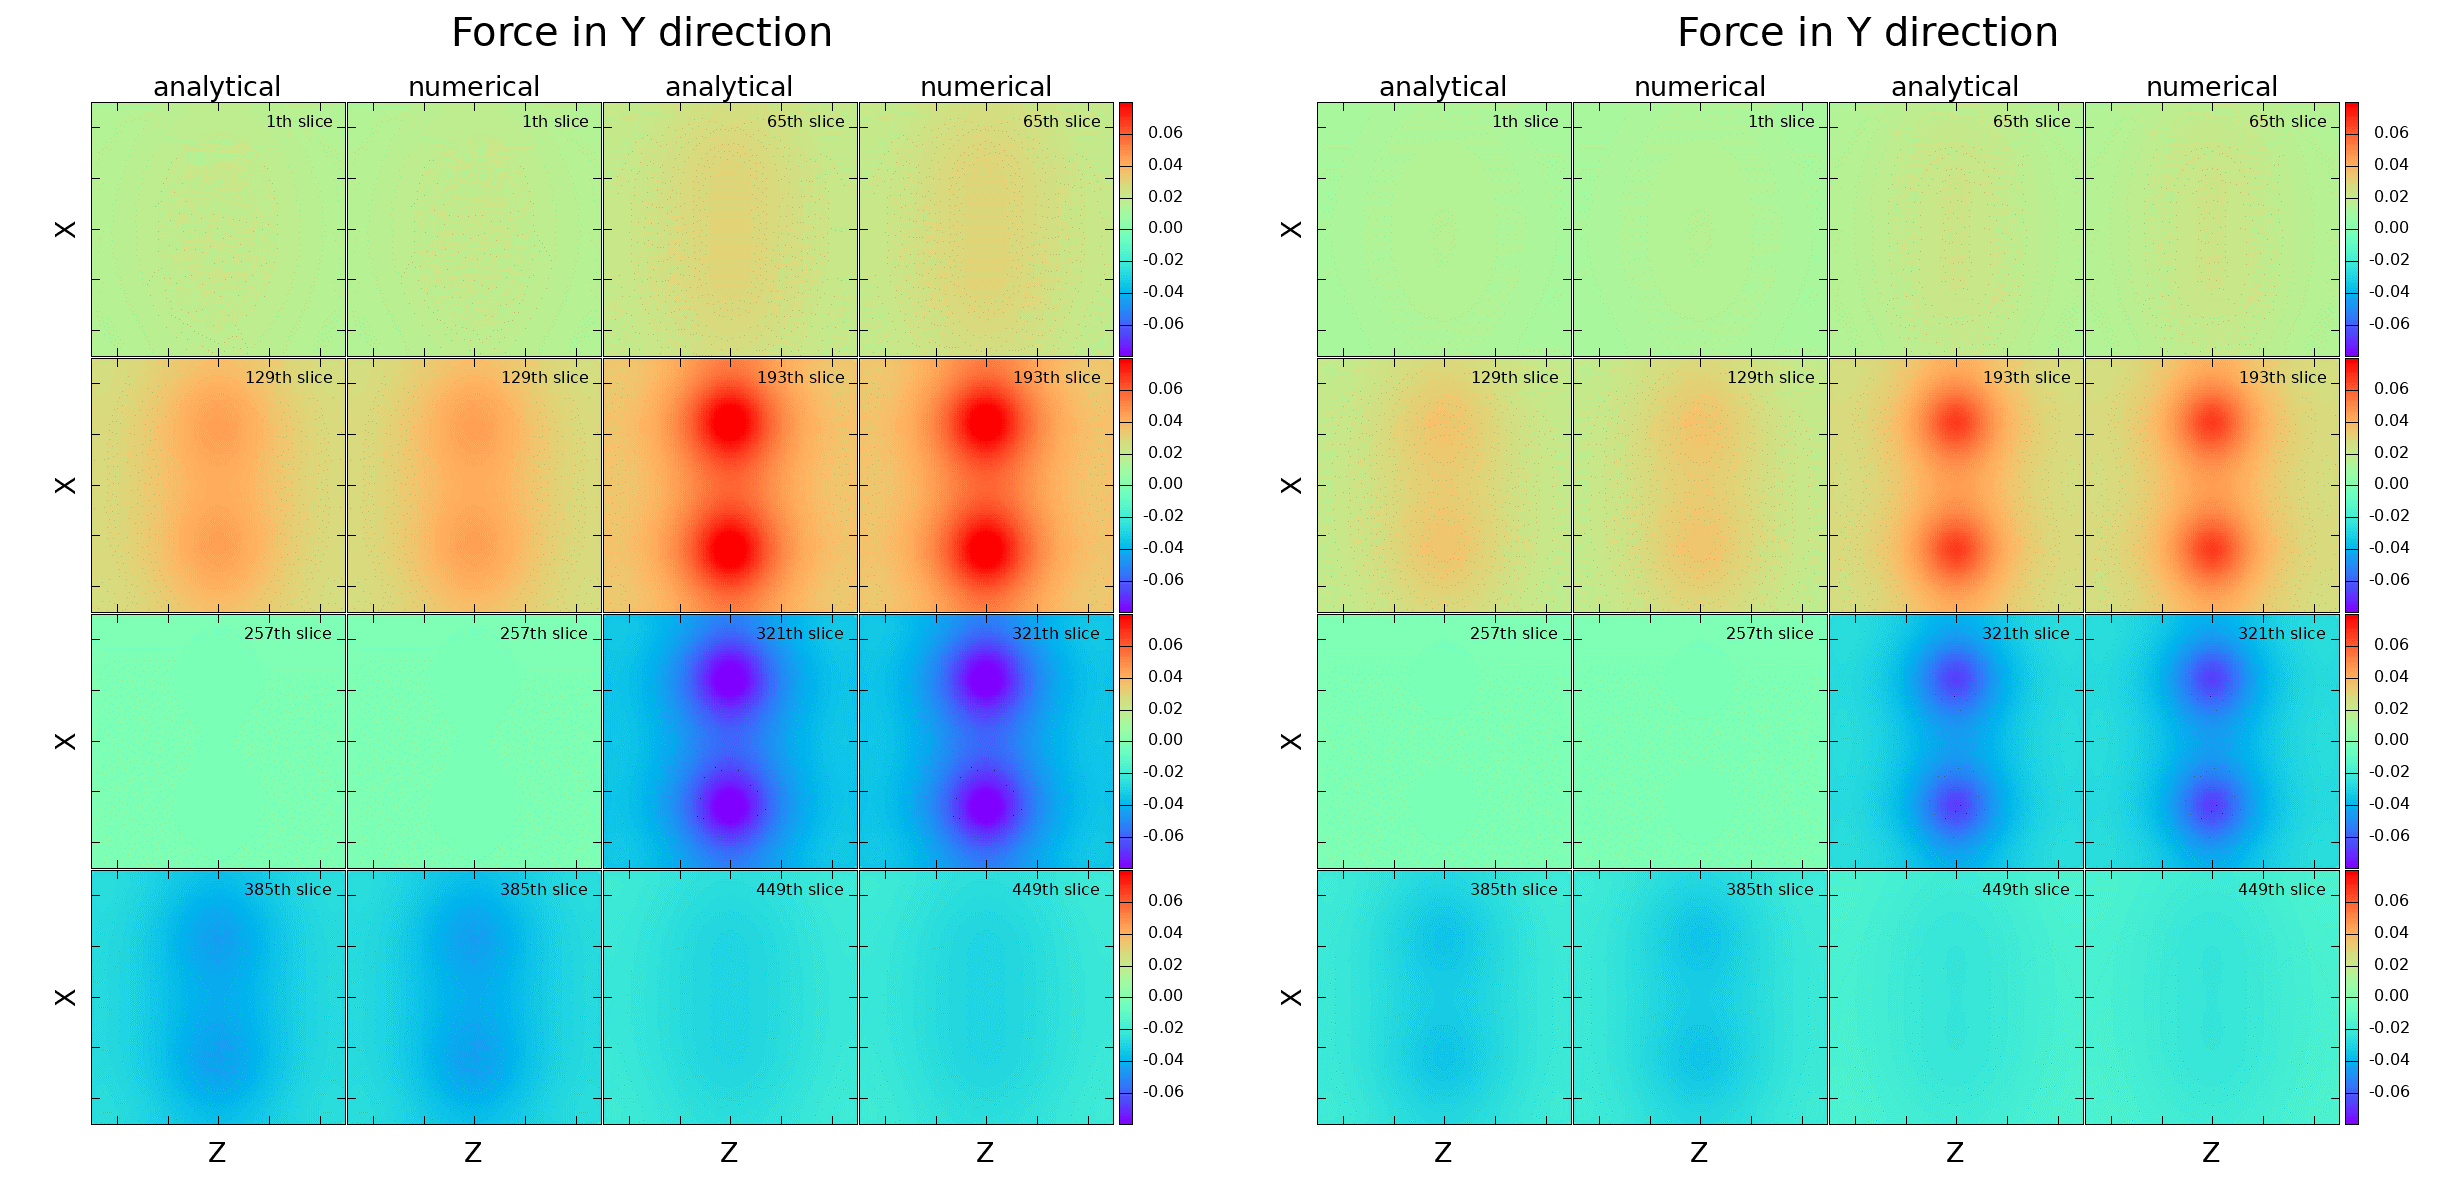 Color maps of force in the y direction